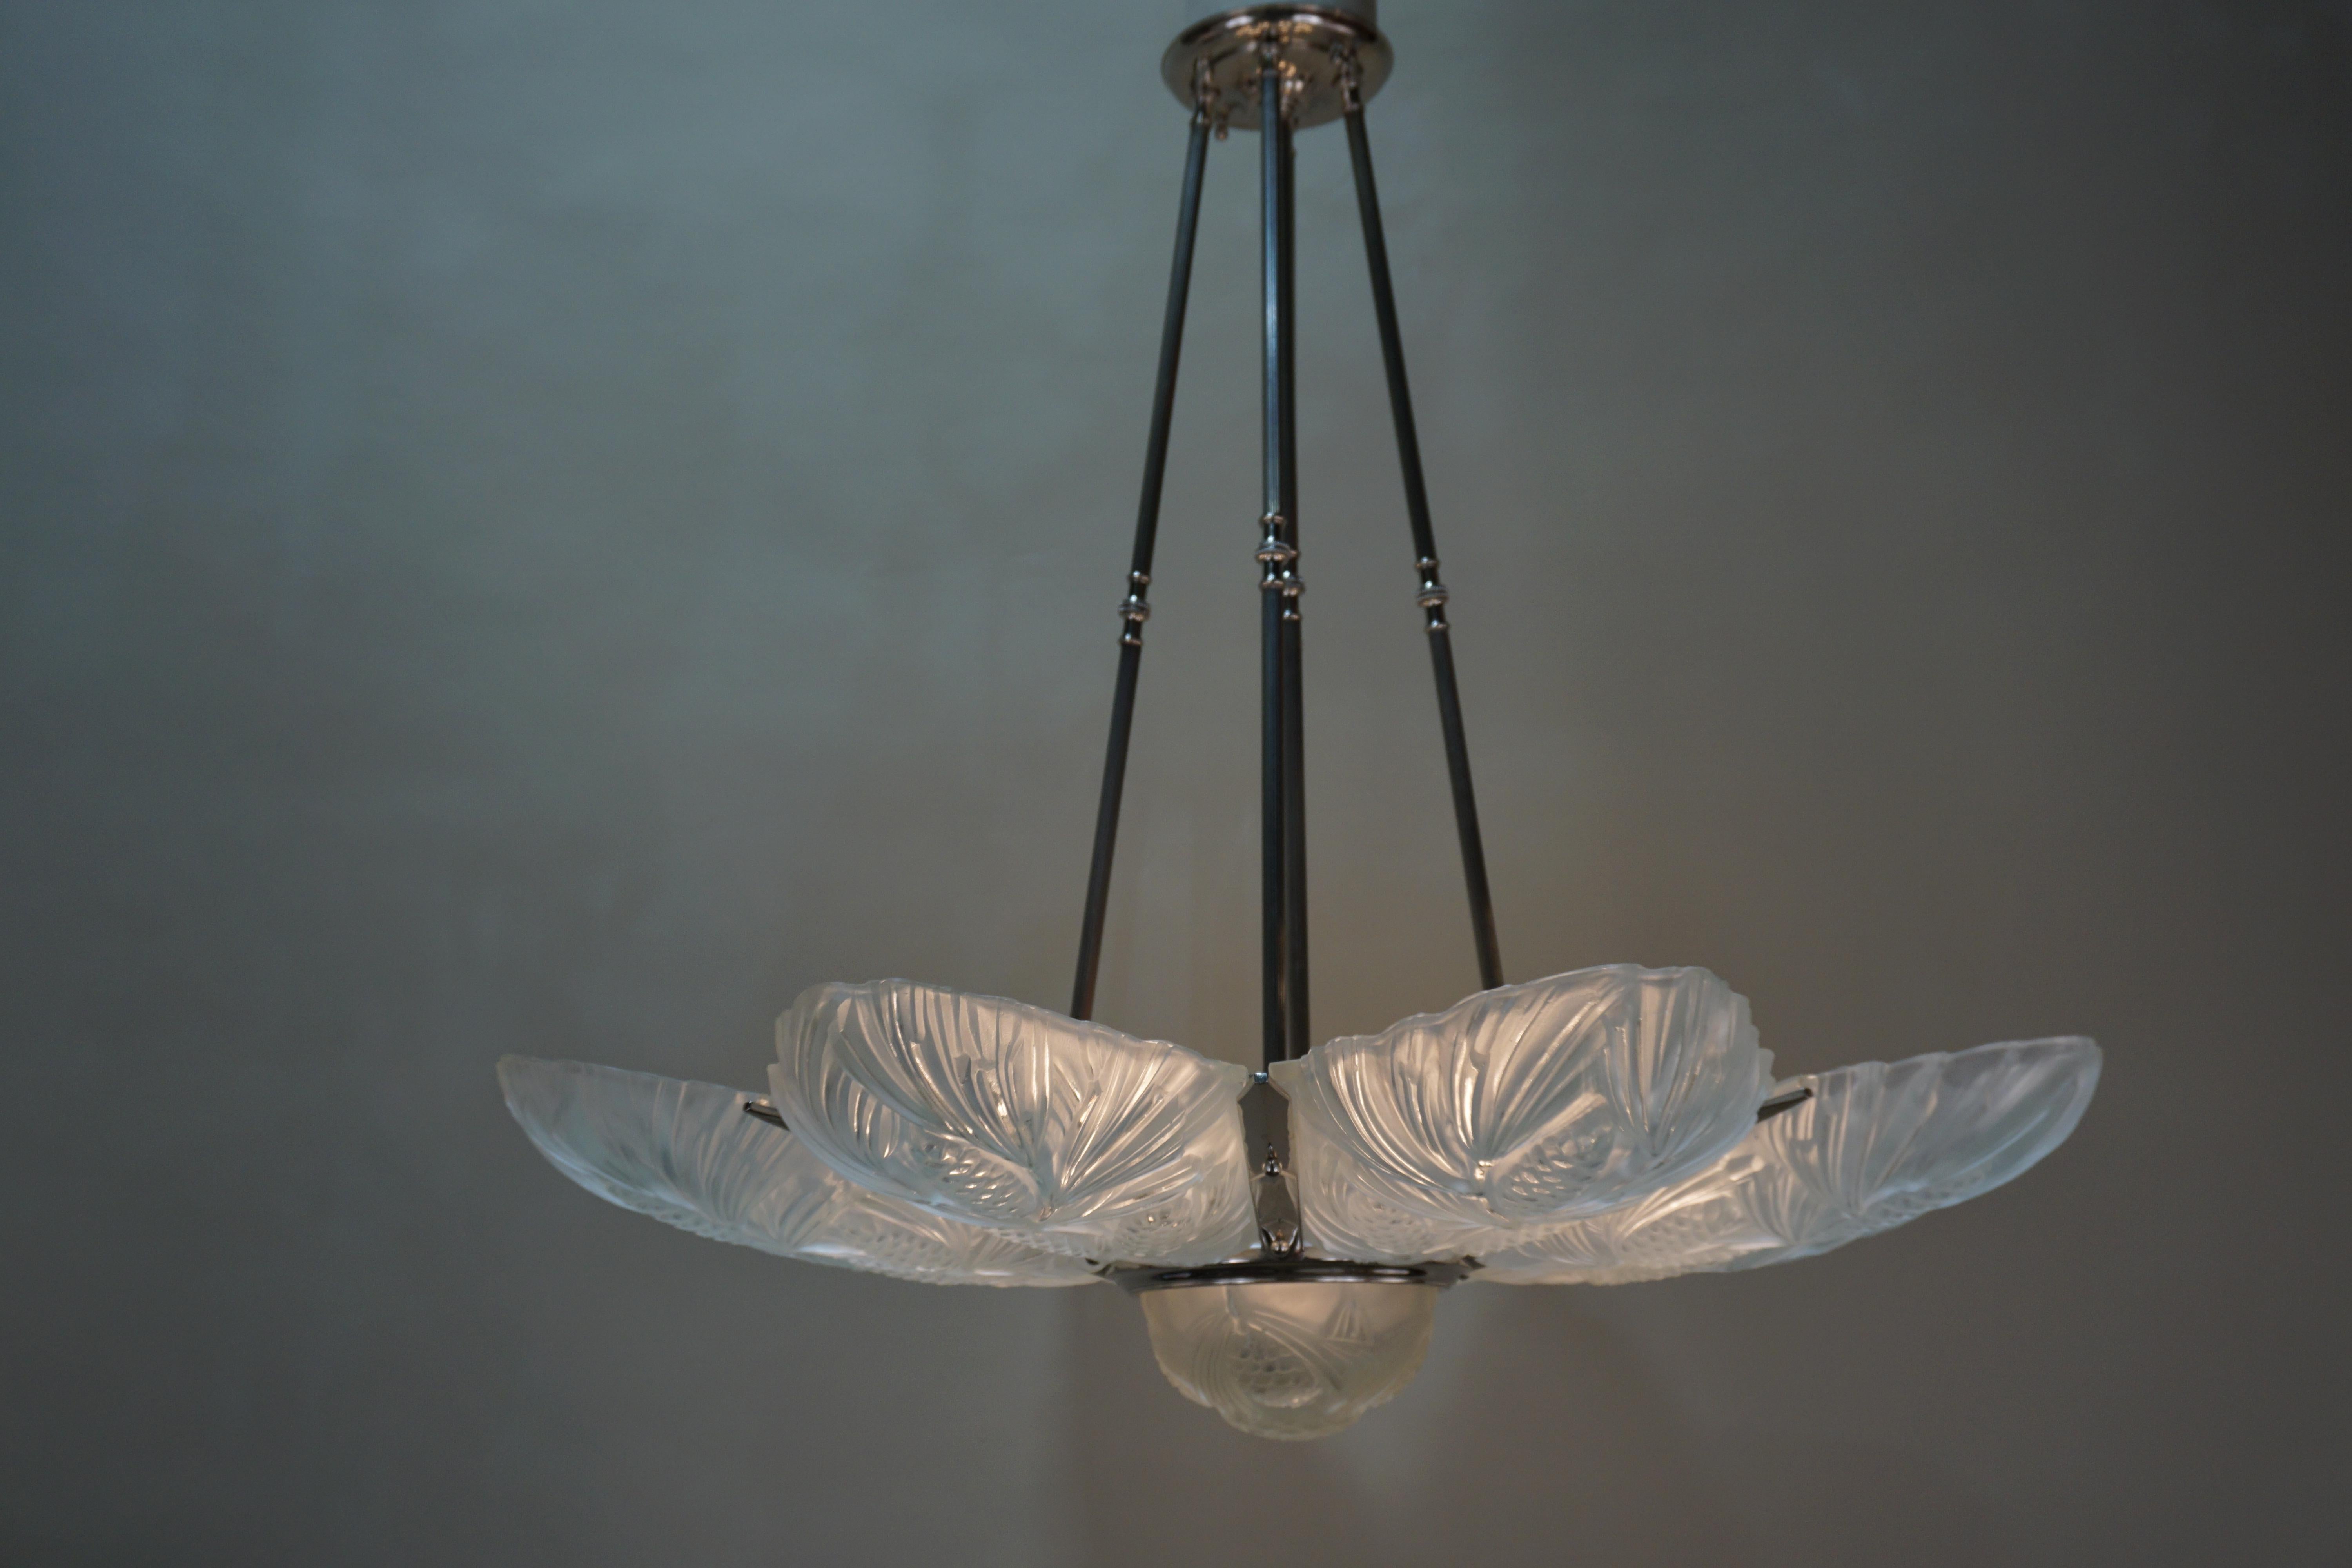  Large Art Deco Chandelier by Sabino 1